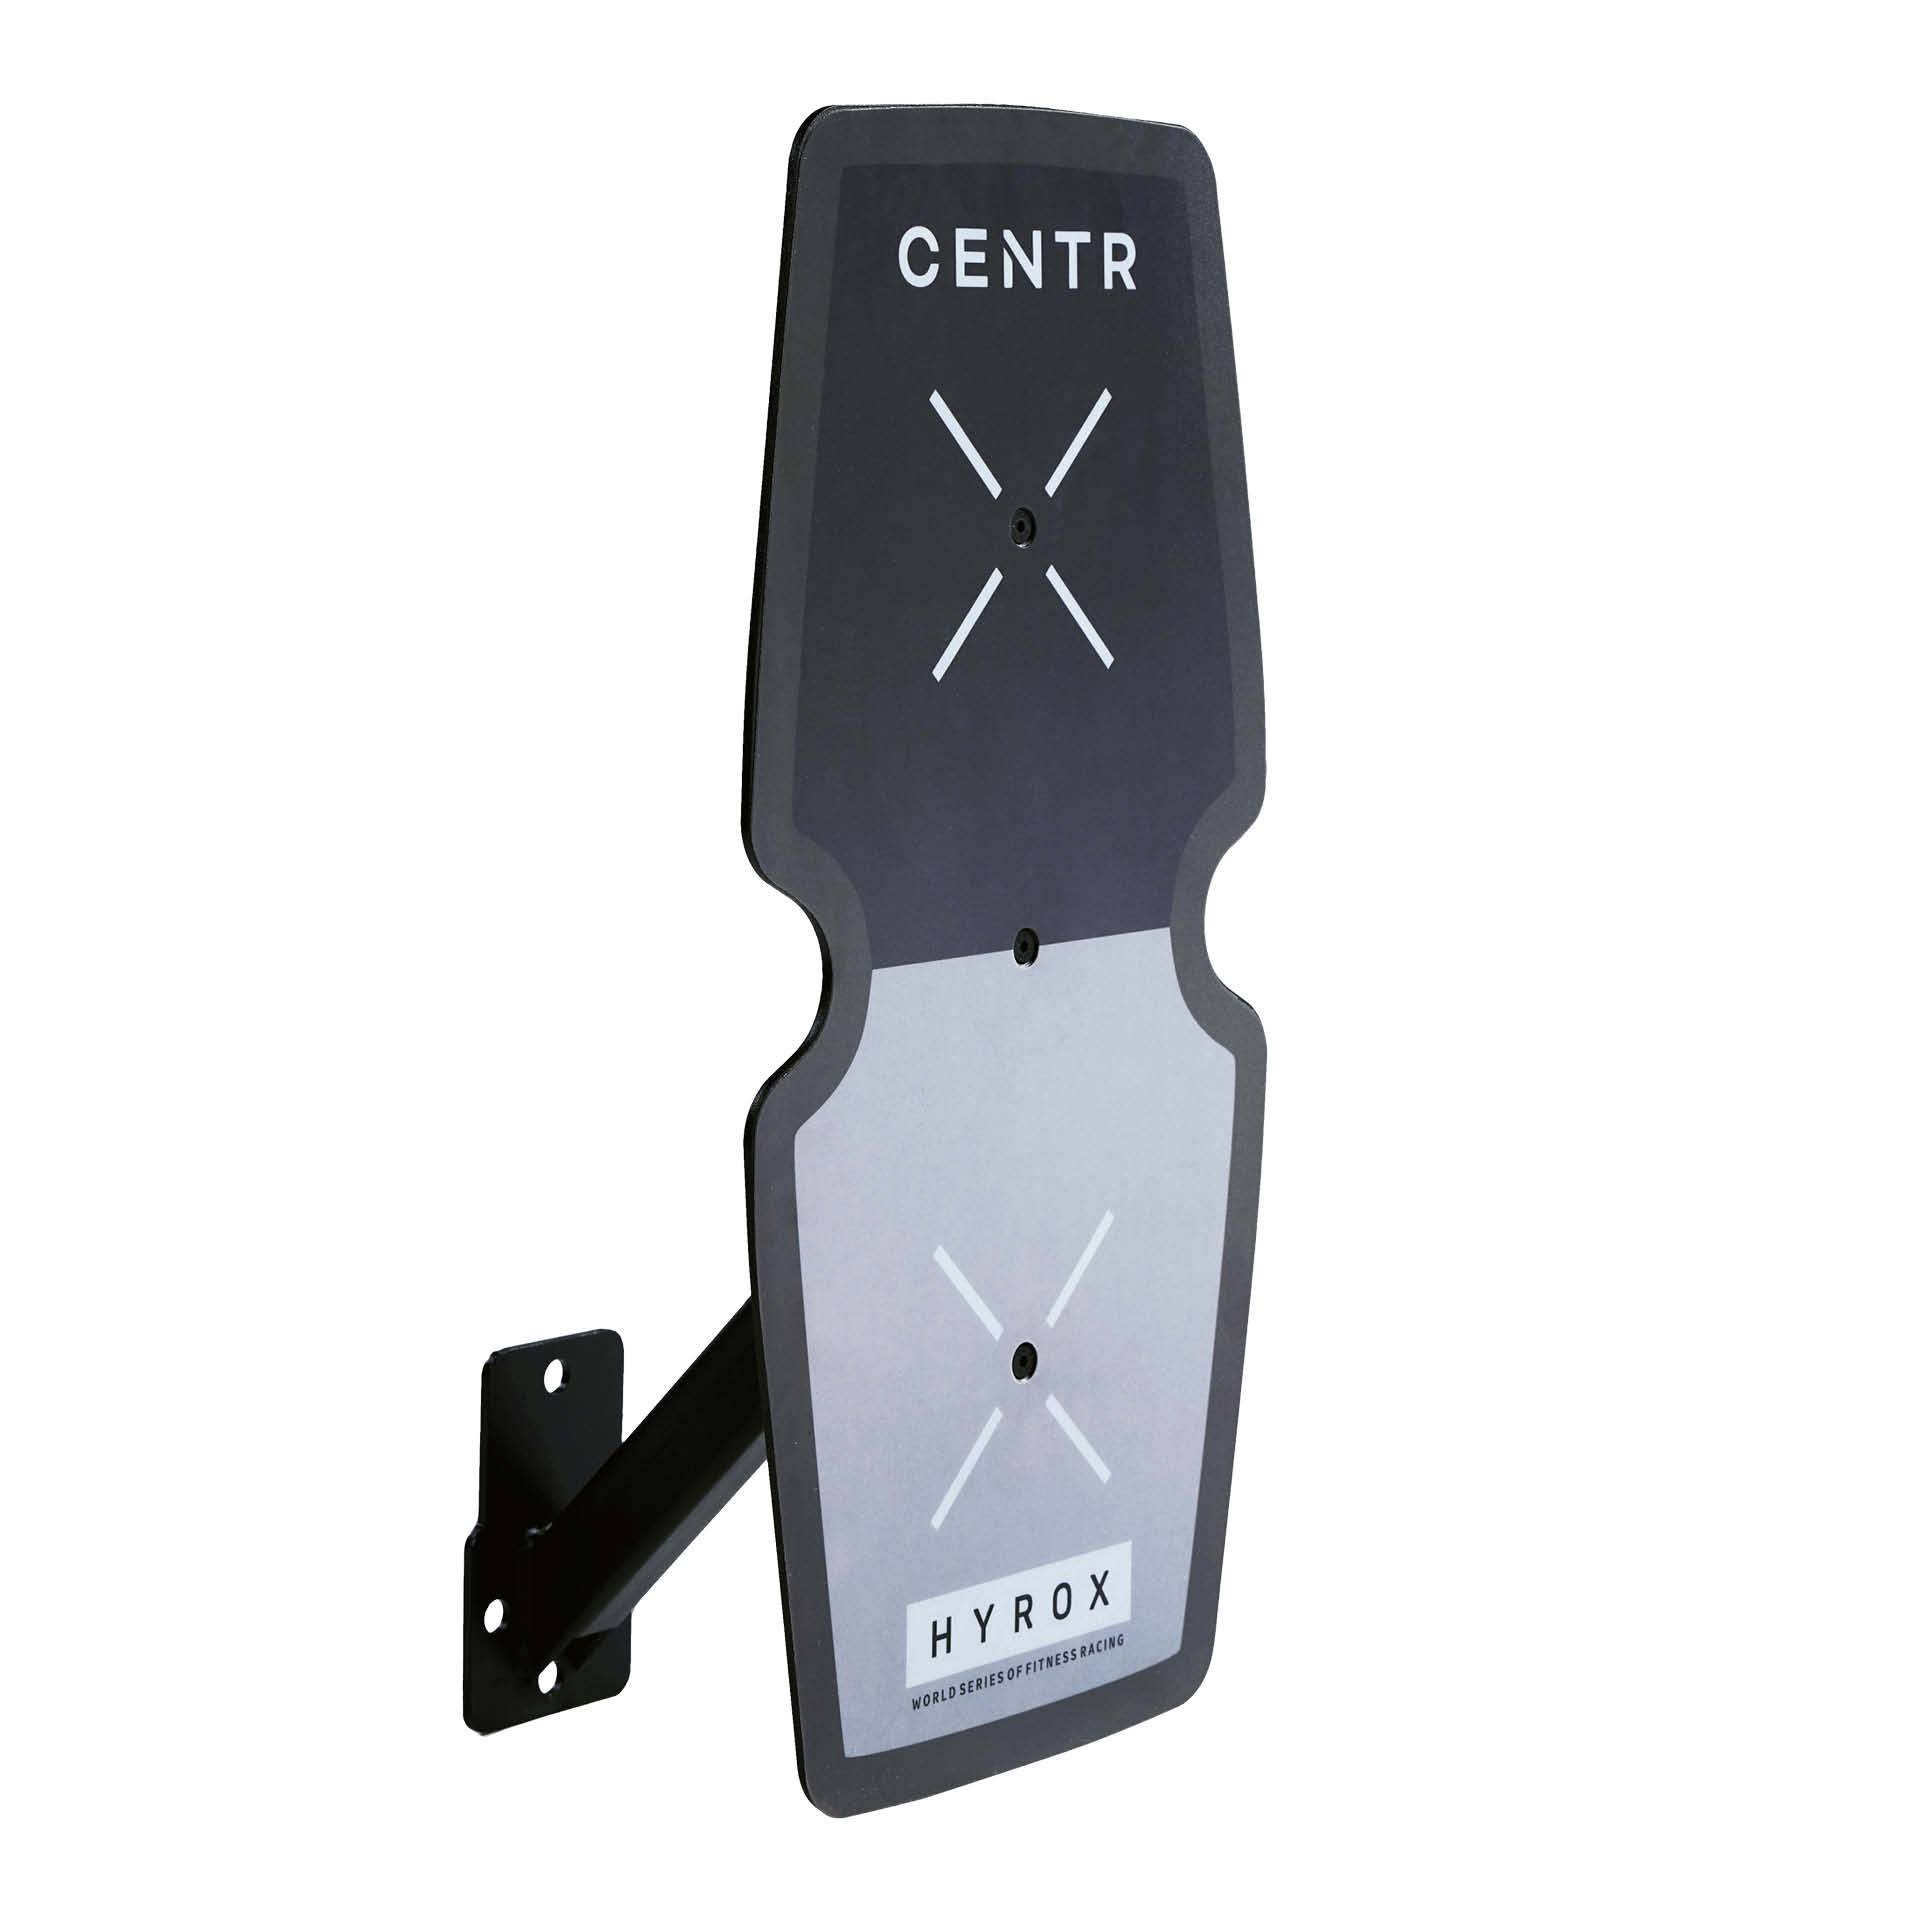 CENTR x HYROX Competition Rig Target von Perform Better